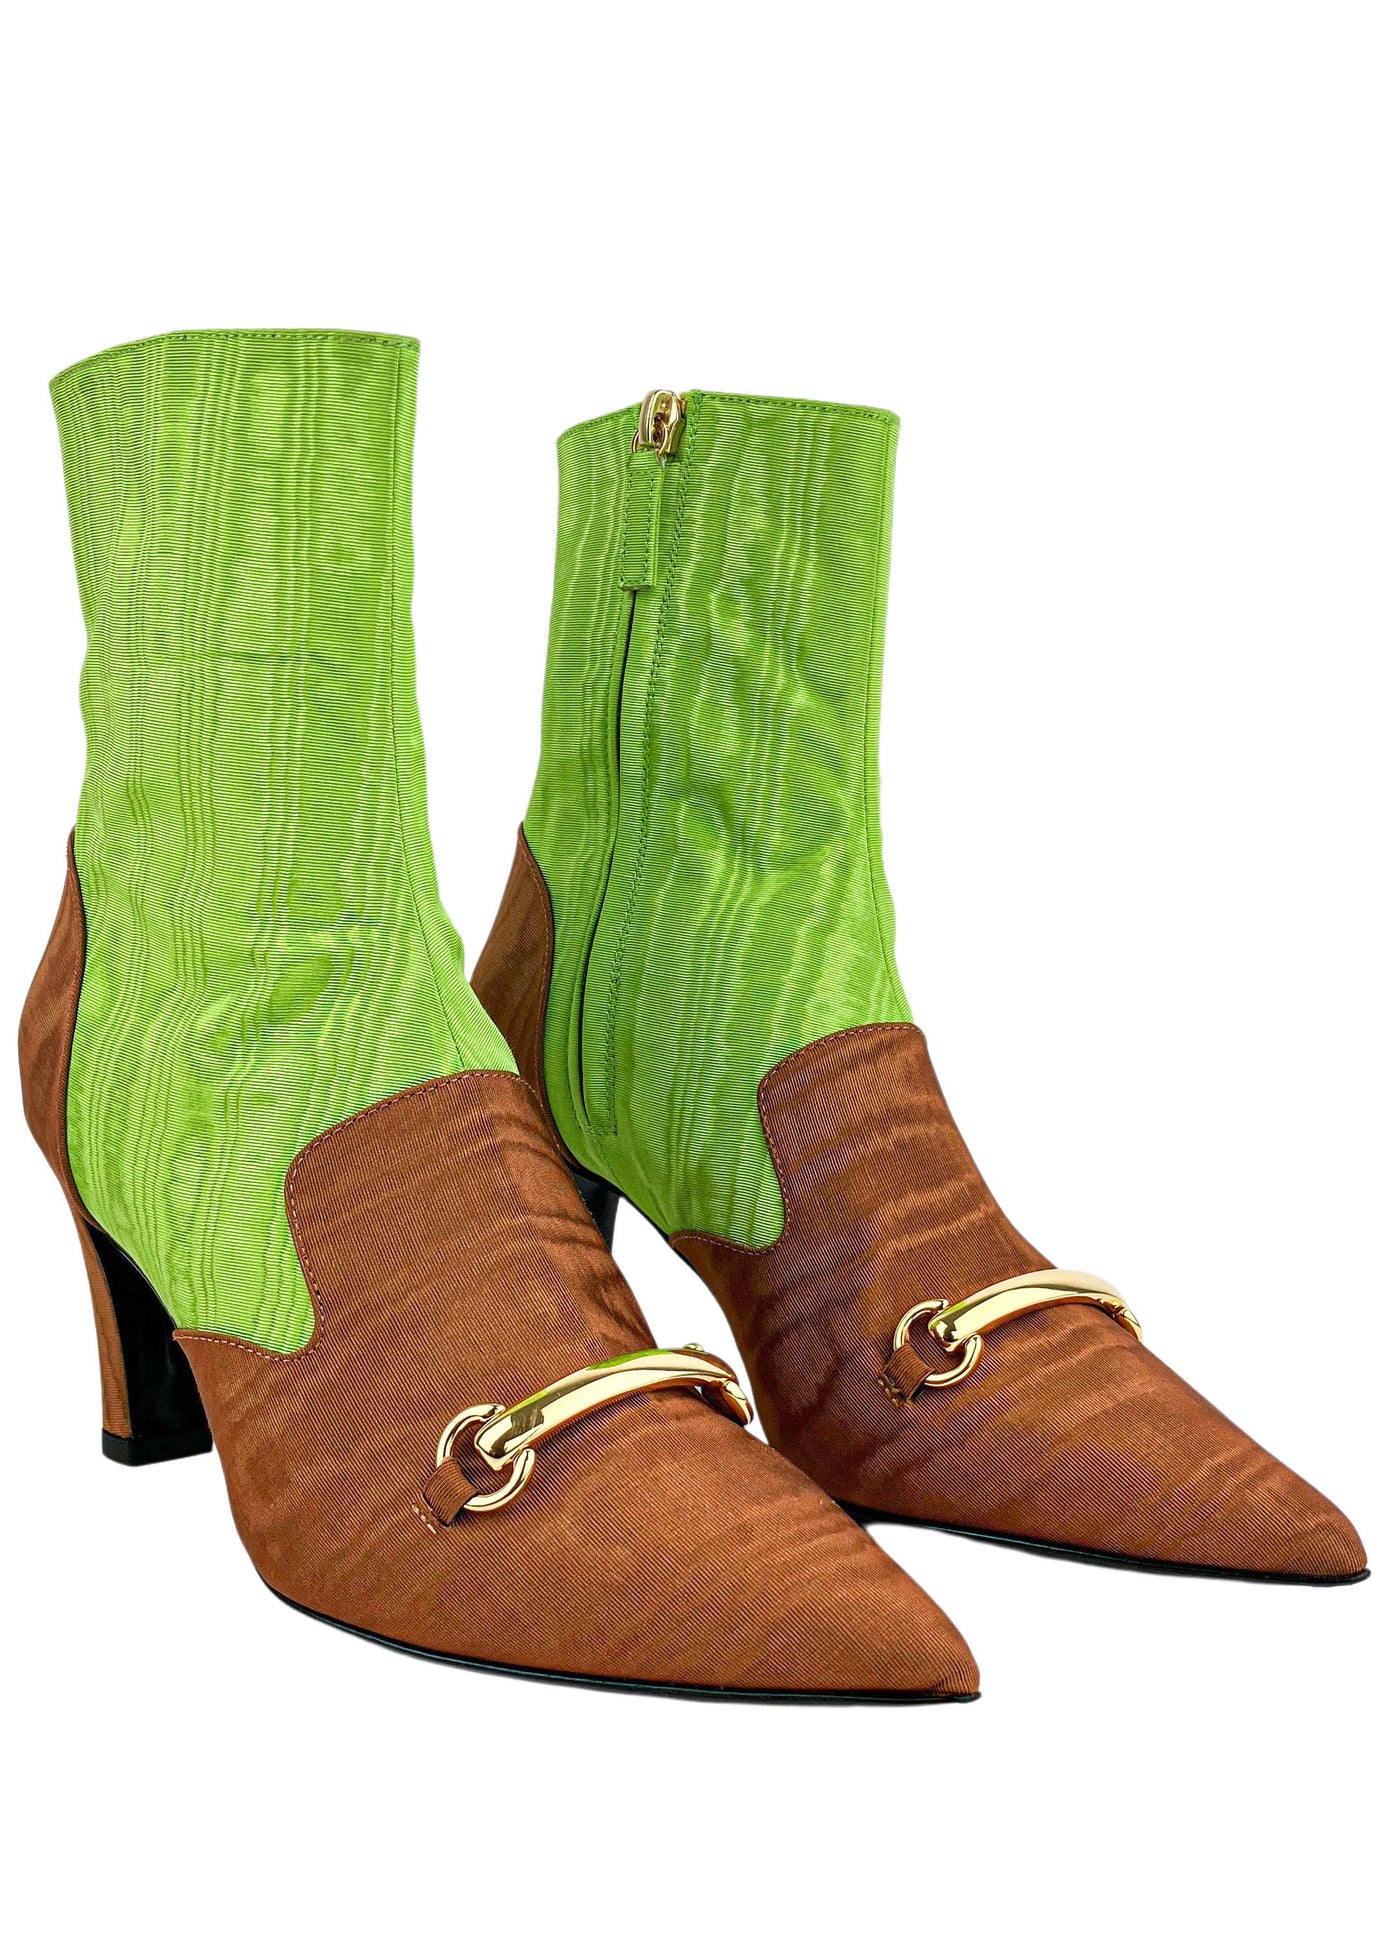 Suzanne Rae Blixen Lady Boot in Lime and Harvest Brown - Discounts on Suzanne Rae at UAL